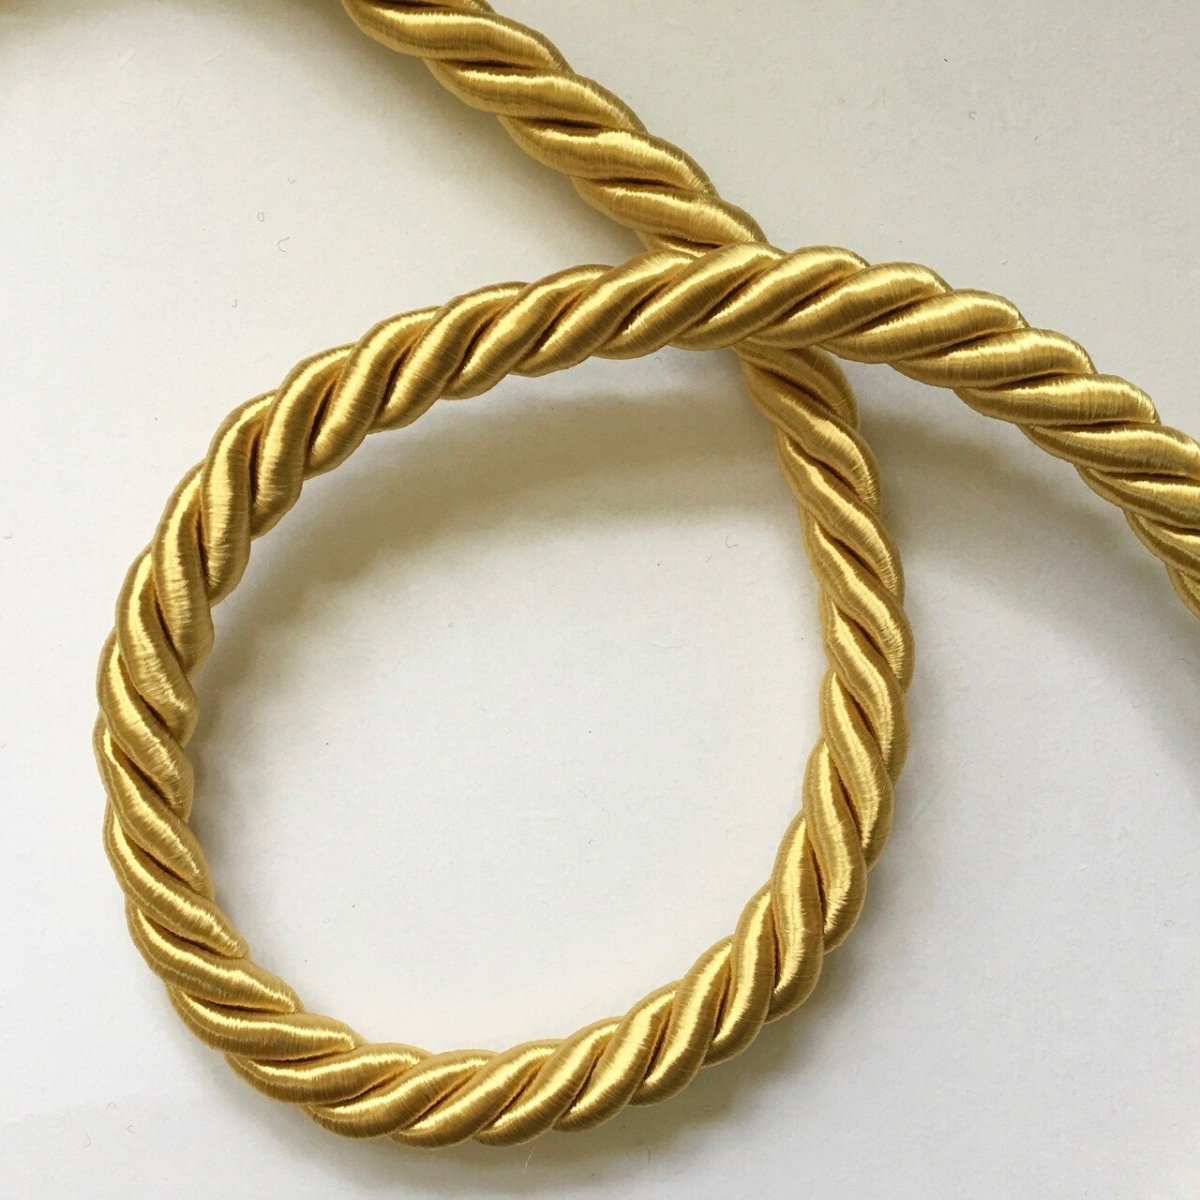 1/2 Old Gold Decorative Twisted Cord Trim BTY USA Made